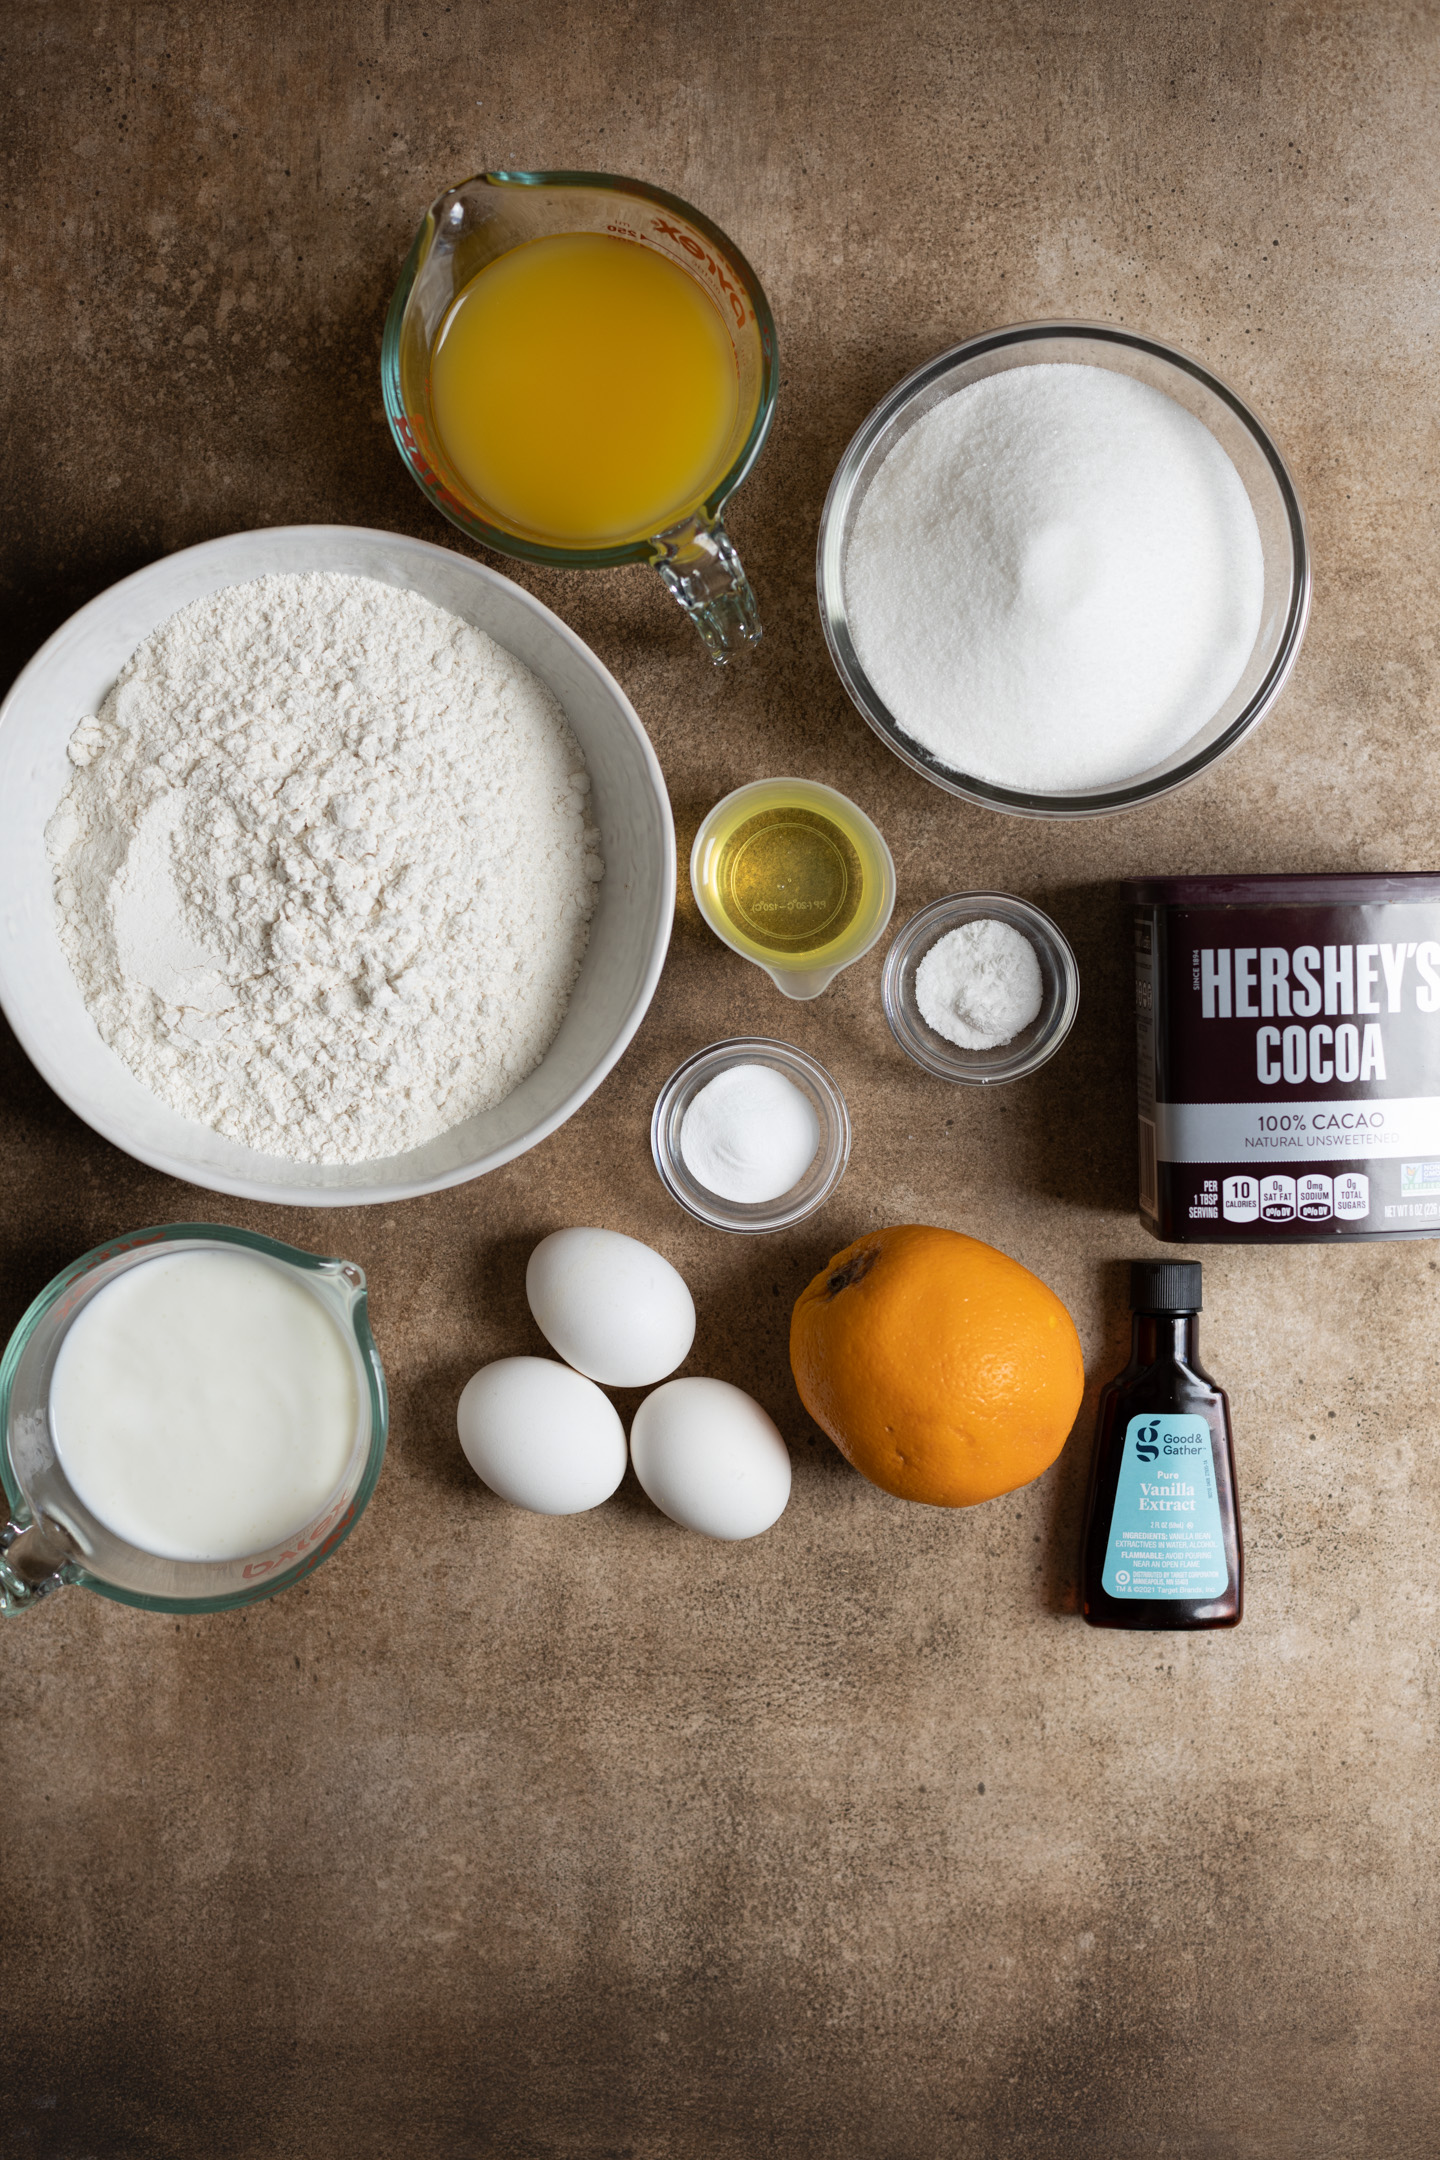 Ingredients for a chocolate orange cake.